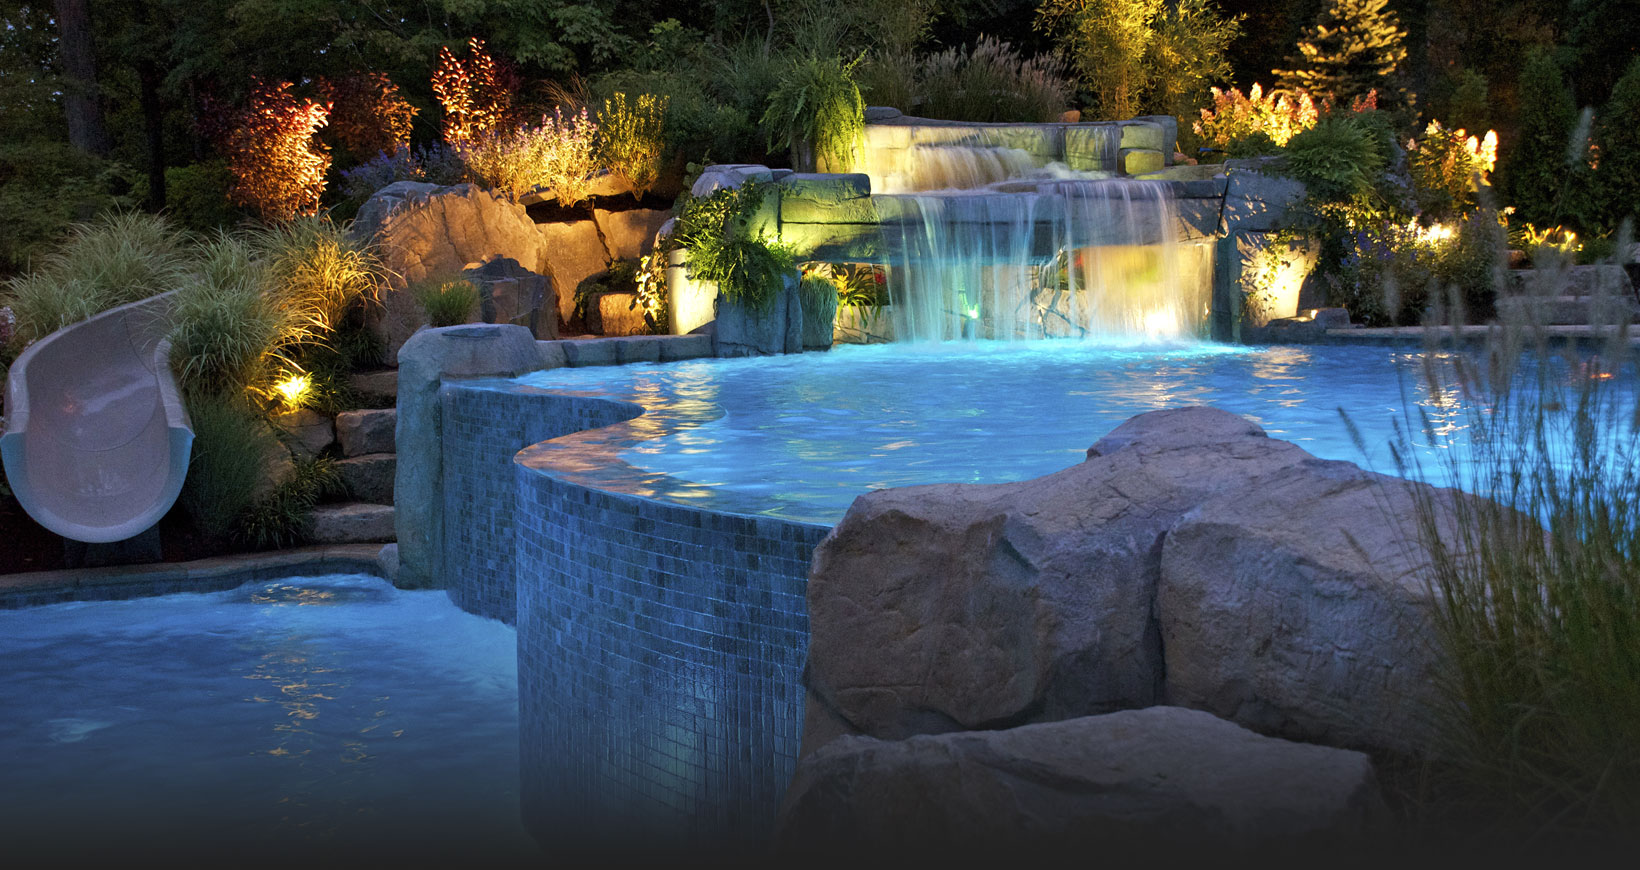 Backyard Pool And Remarkable Backyard Pool With Waterfall And Slide Design Feat Magnificent Rock Garden Idea Backyard  Naturalist House In Backyard Pool Ideas 